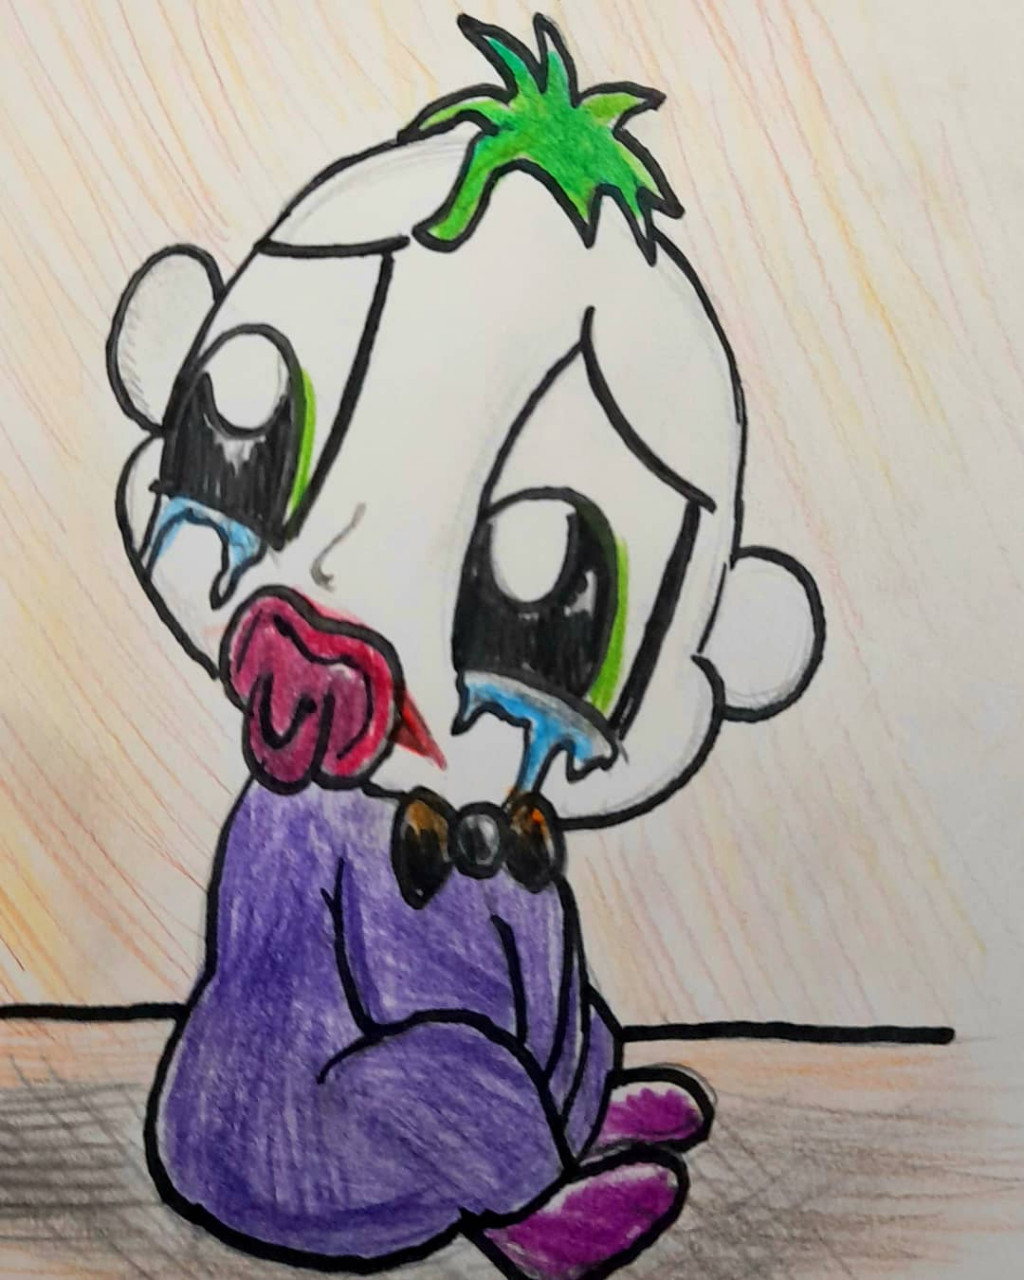 Baby Joker is upset about something.